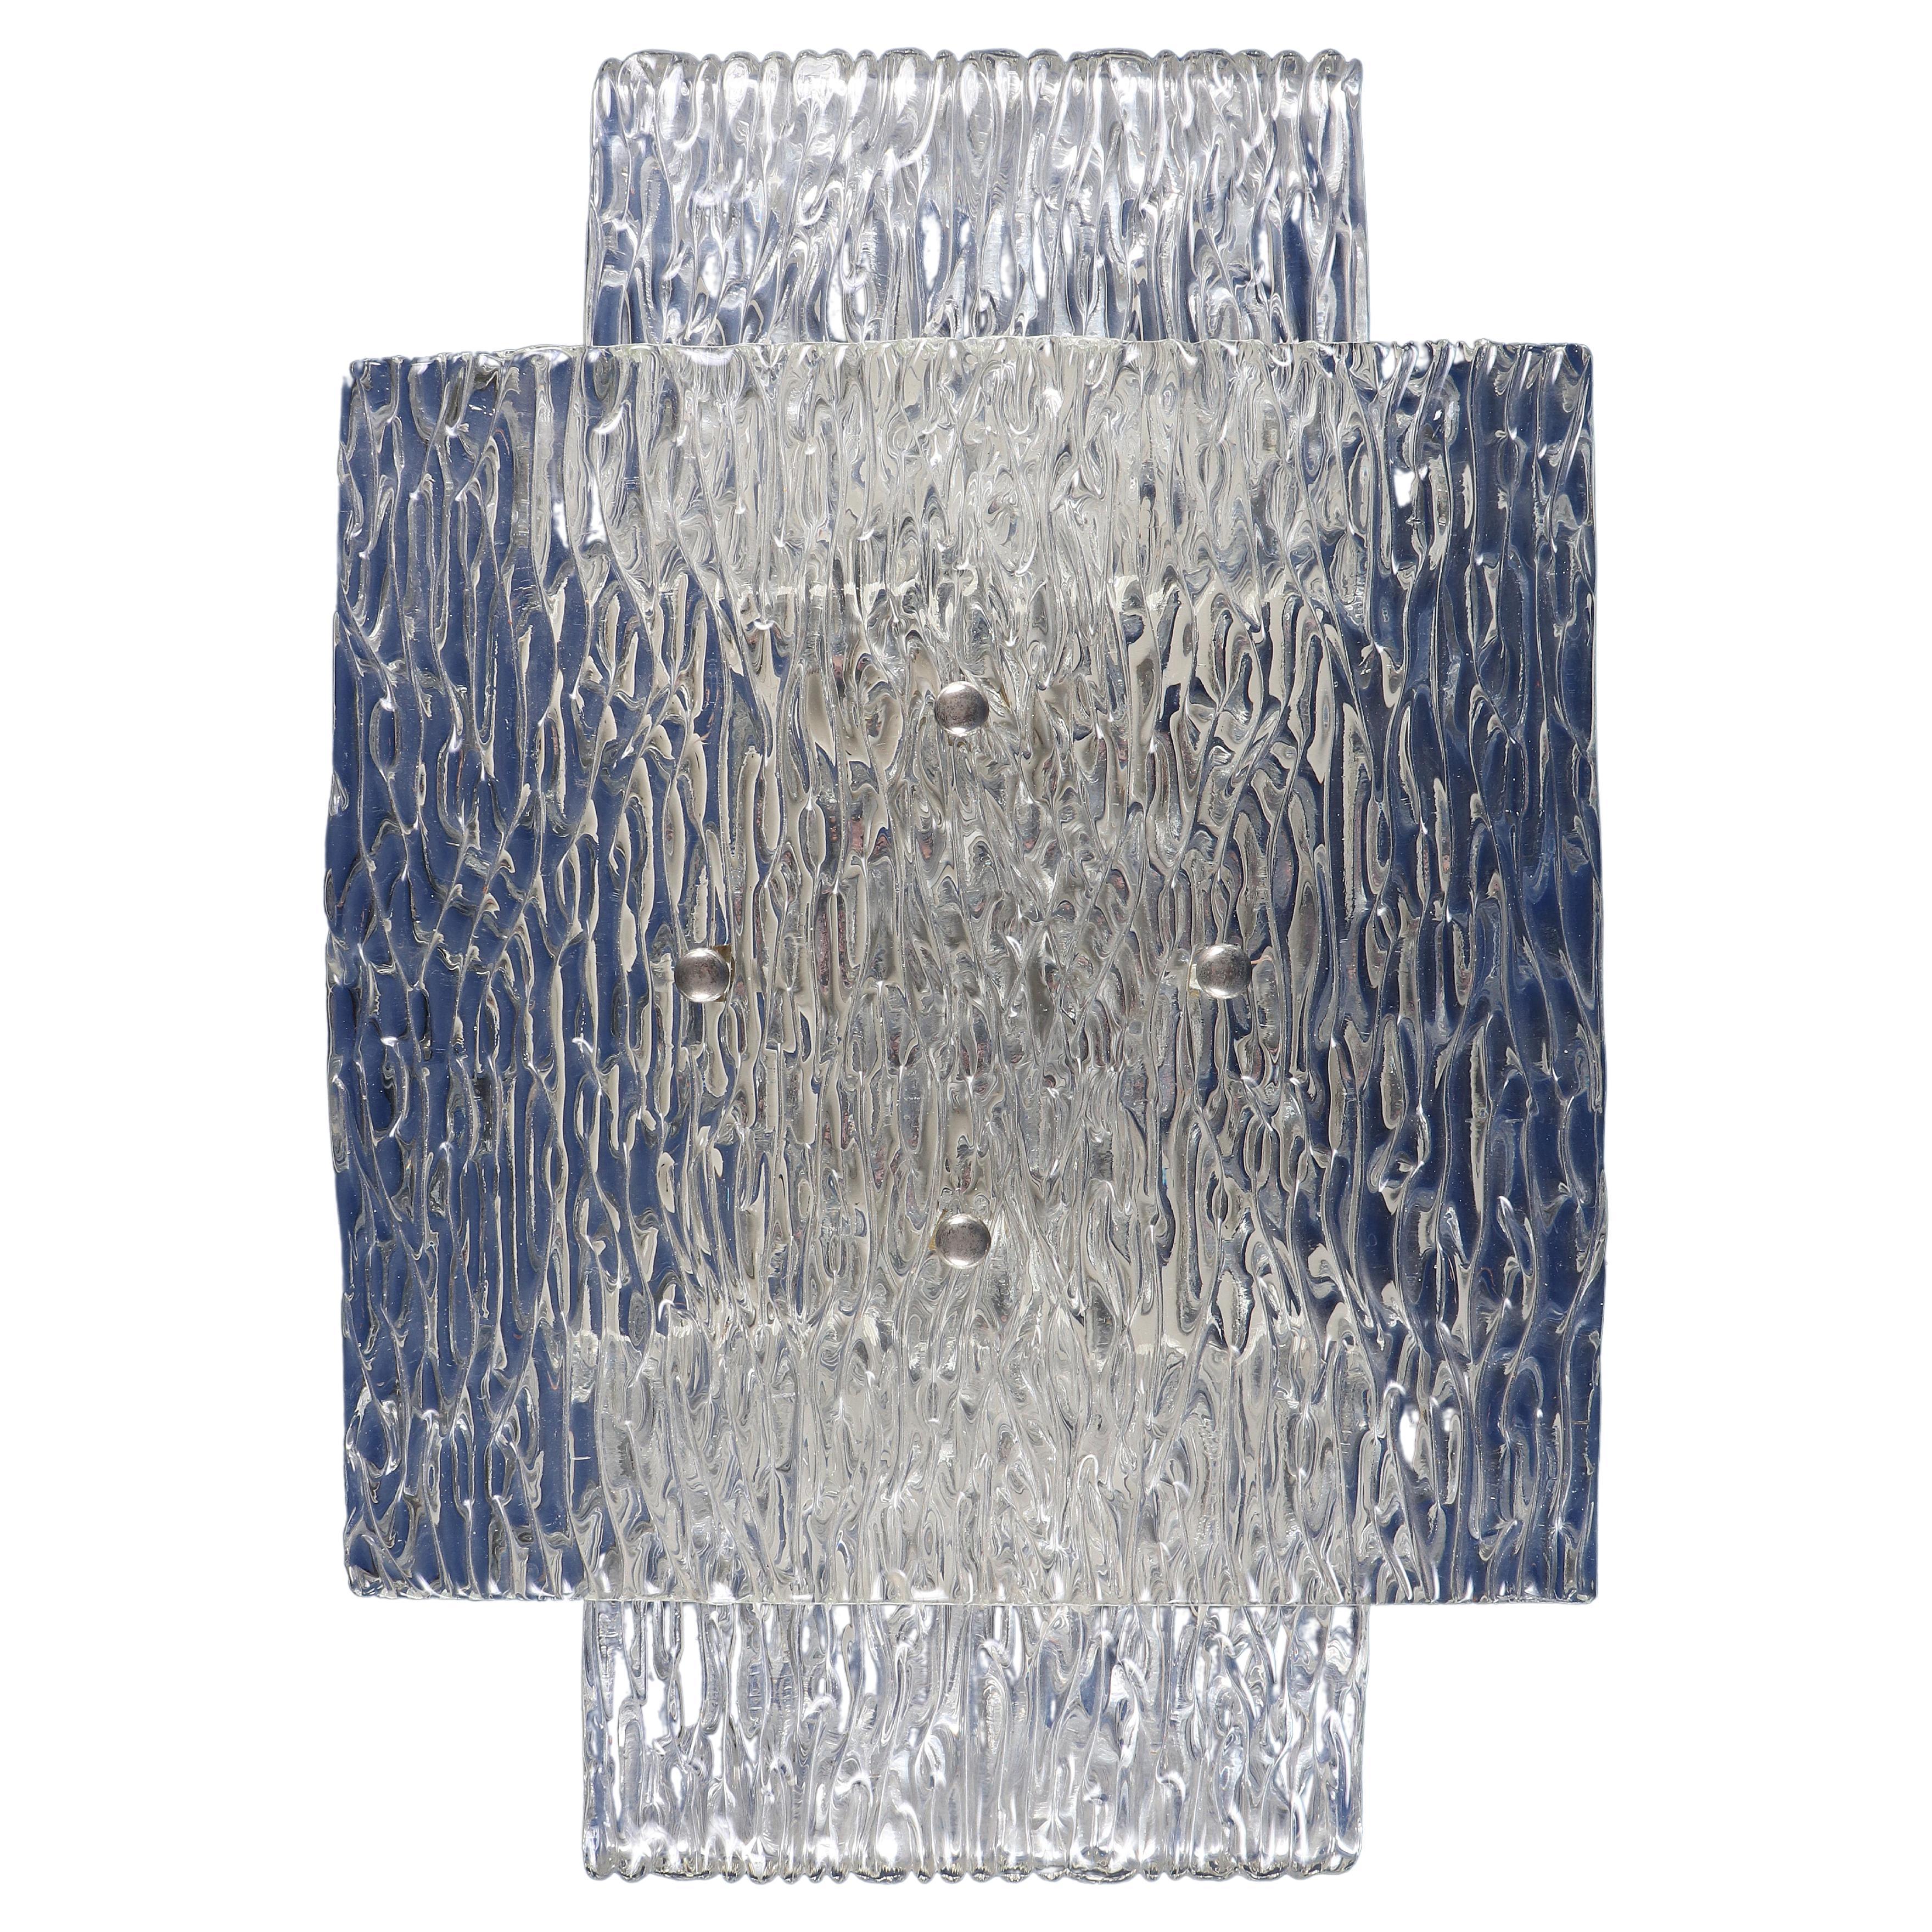 J. T. Kalmar Ice Glass Wall Light or Sconce For Sale